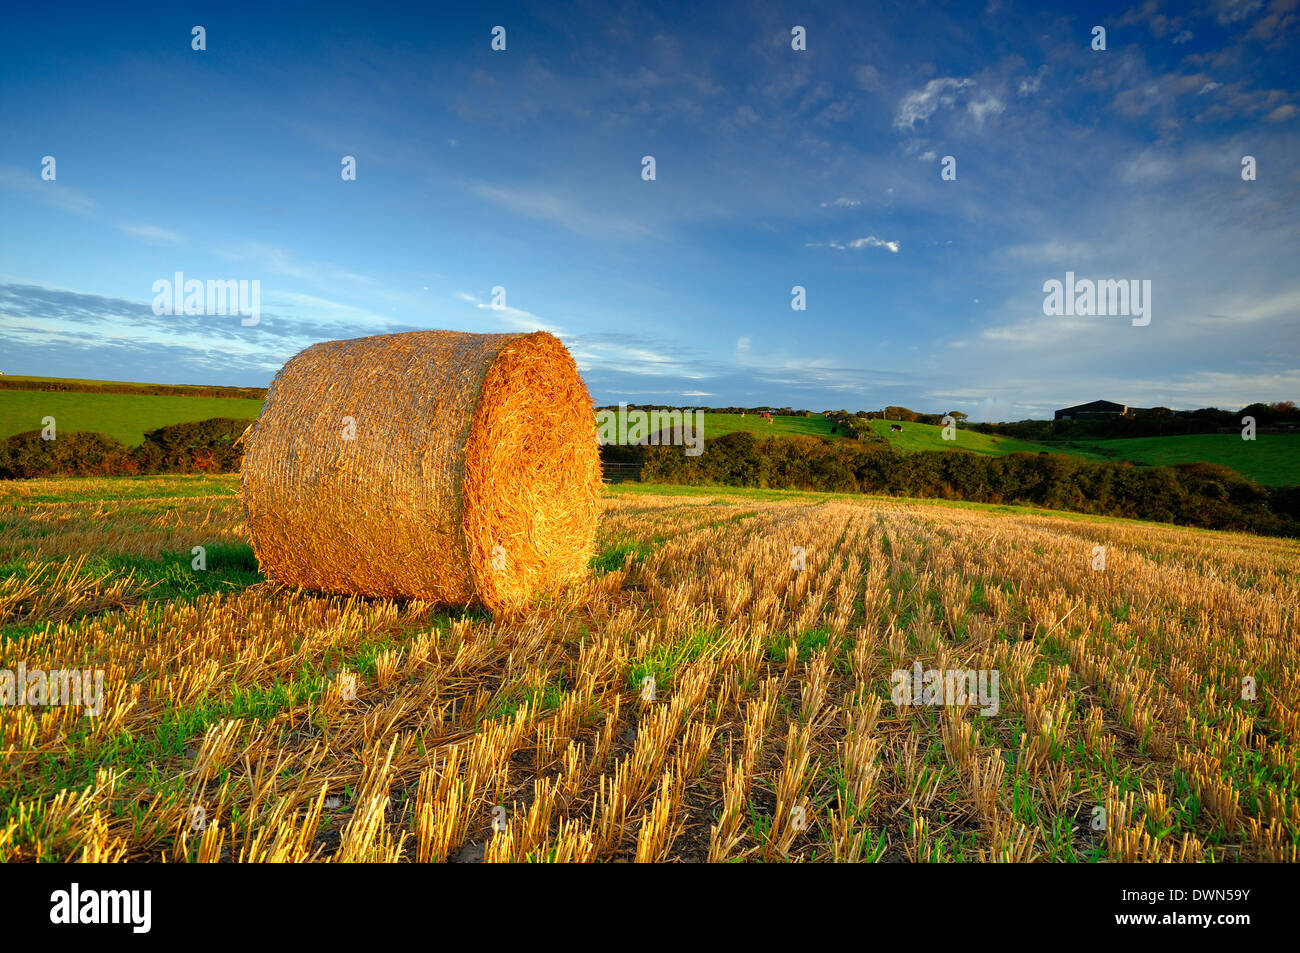 A Bale of  hay in a field of stubble lit by early morning sunlight Stock Photo